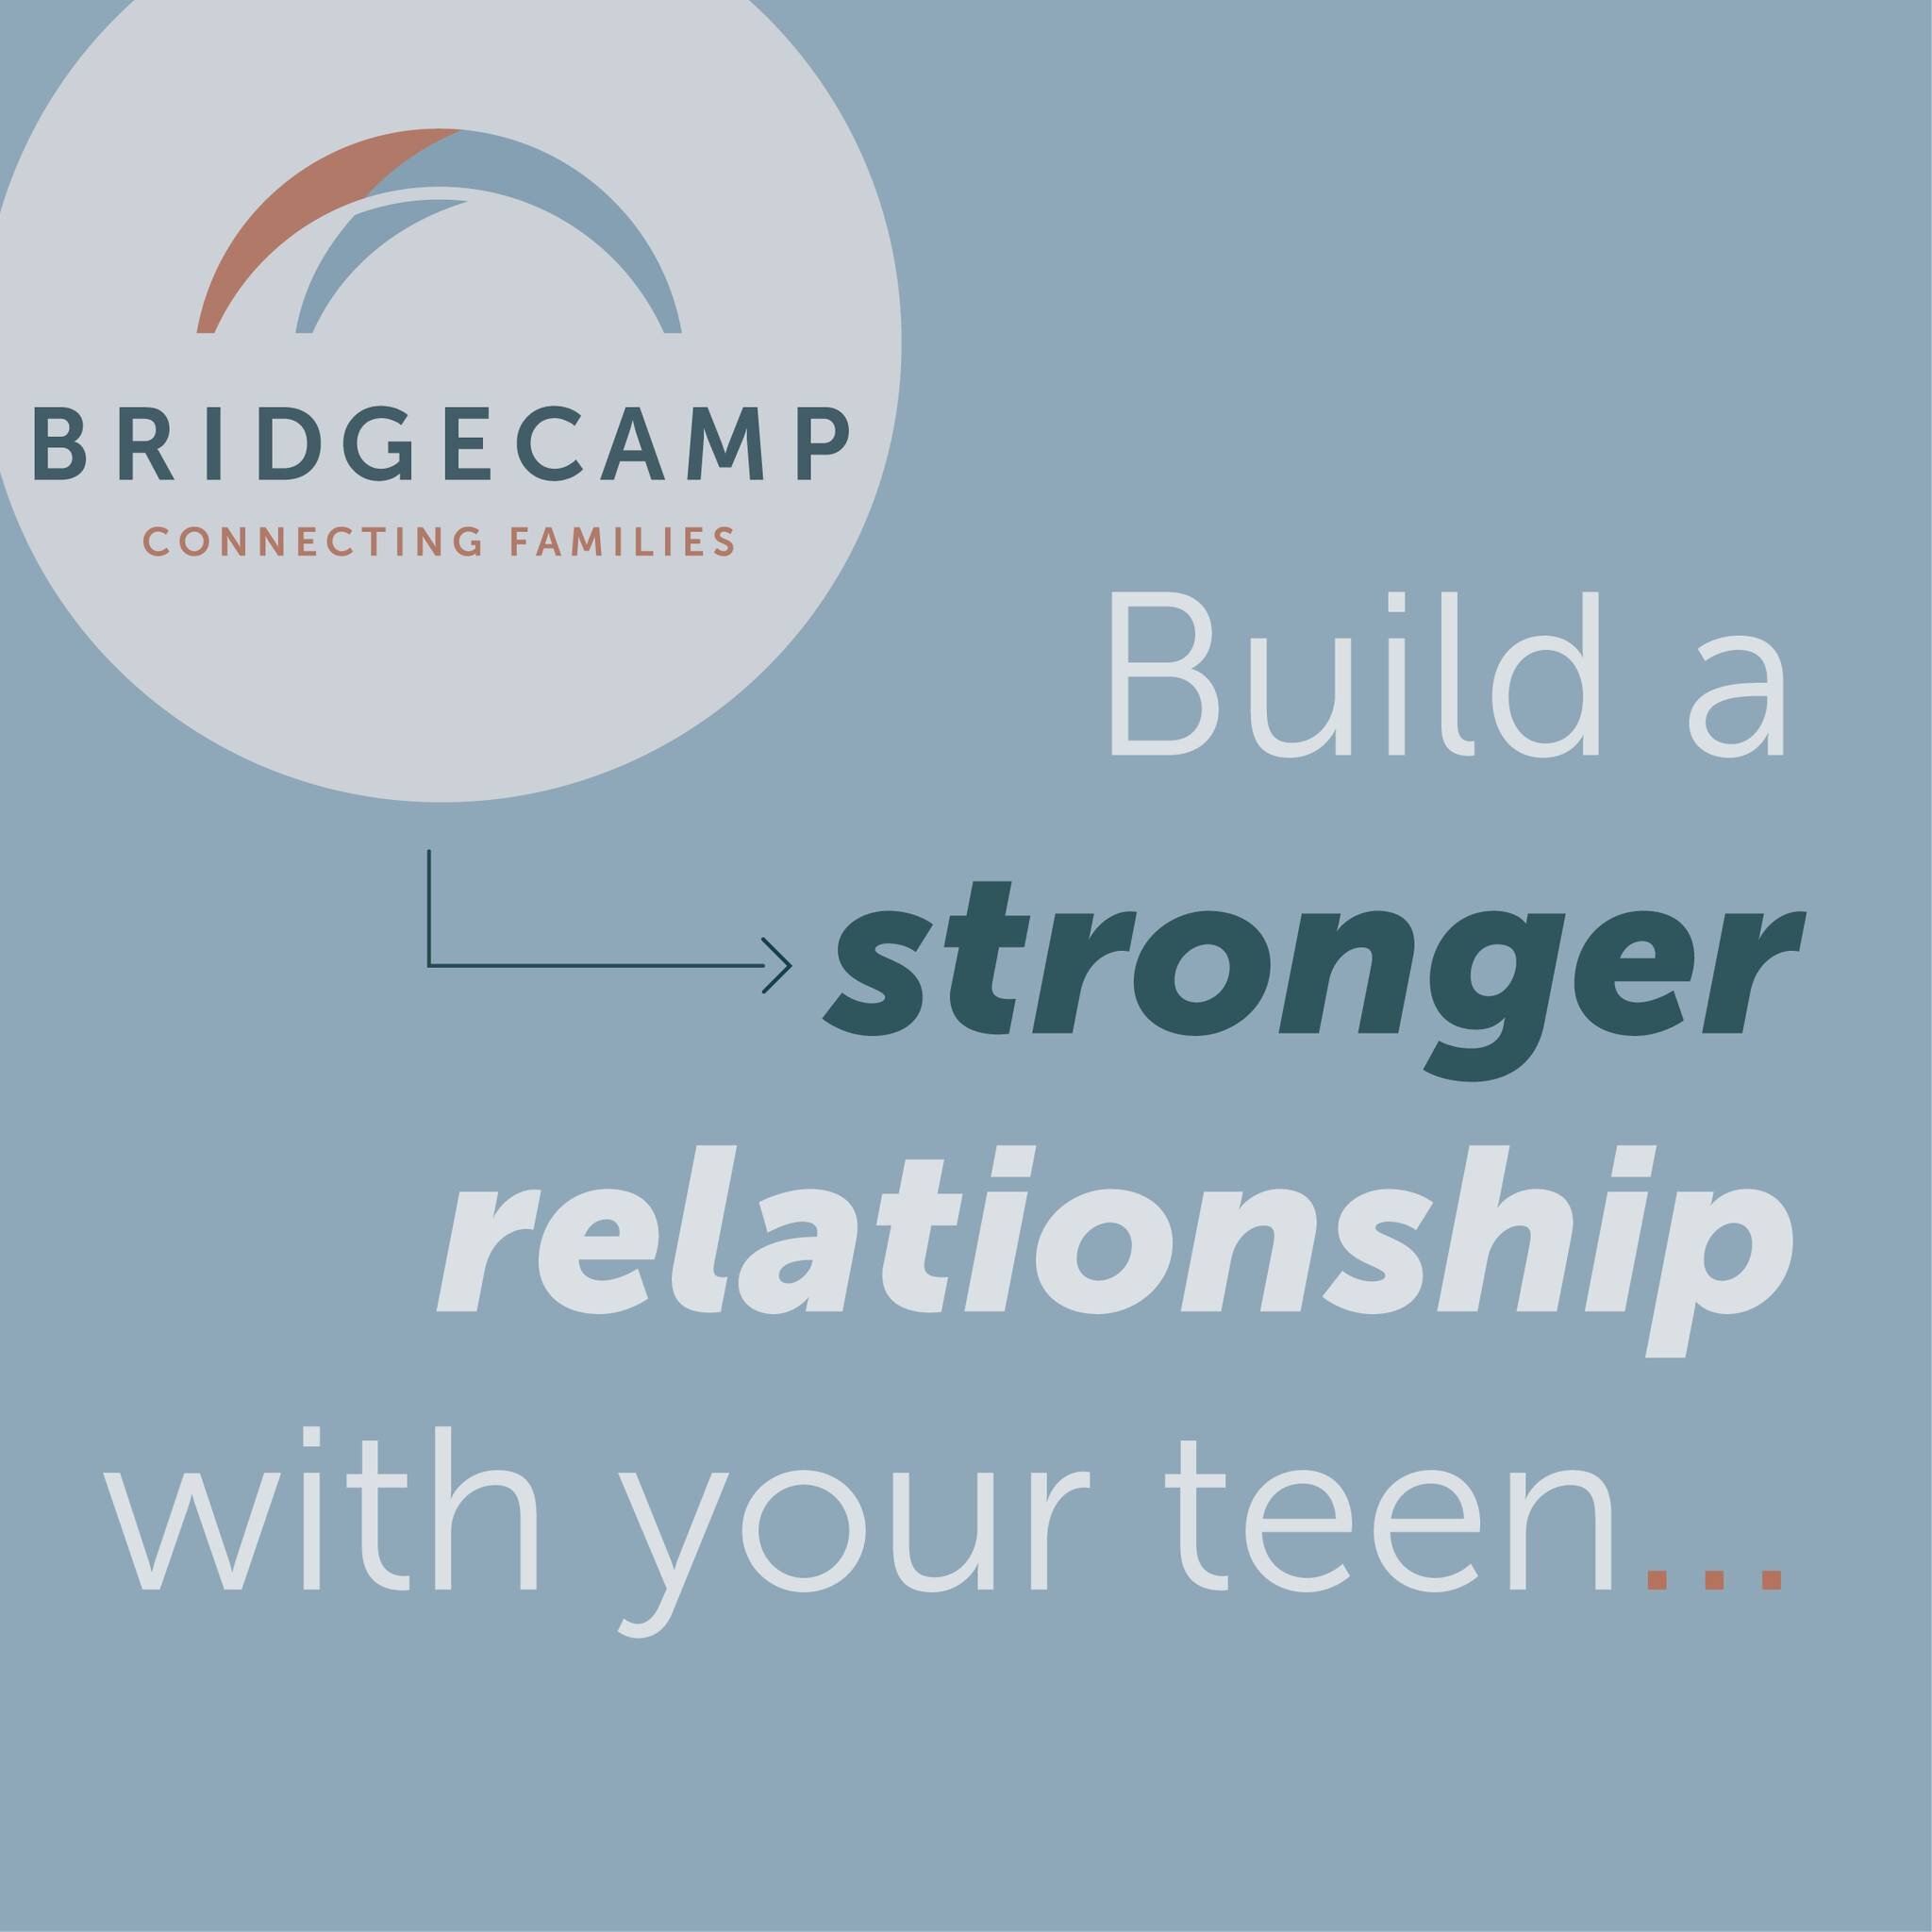 Having a strong relationship with your teen has never been more important. Check out our list of 2024 camps and events to see how you can get involved, and become closer to your teen than ever before.

#parenting #parentingtips #familyfirst #parentin